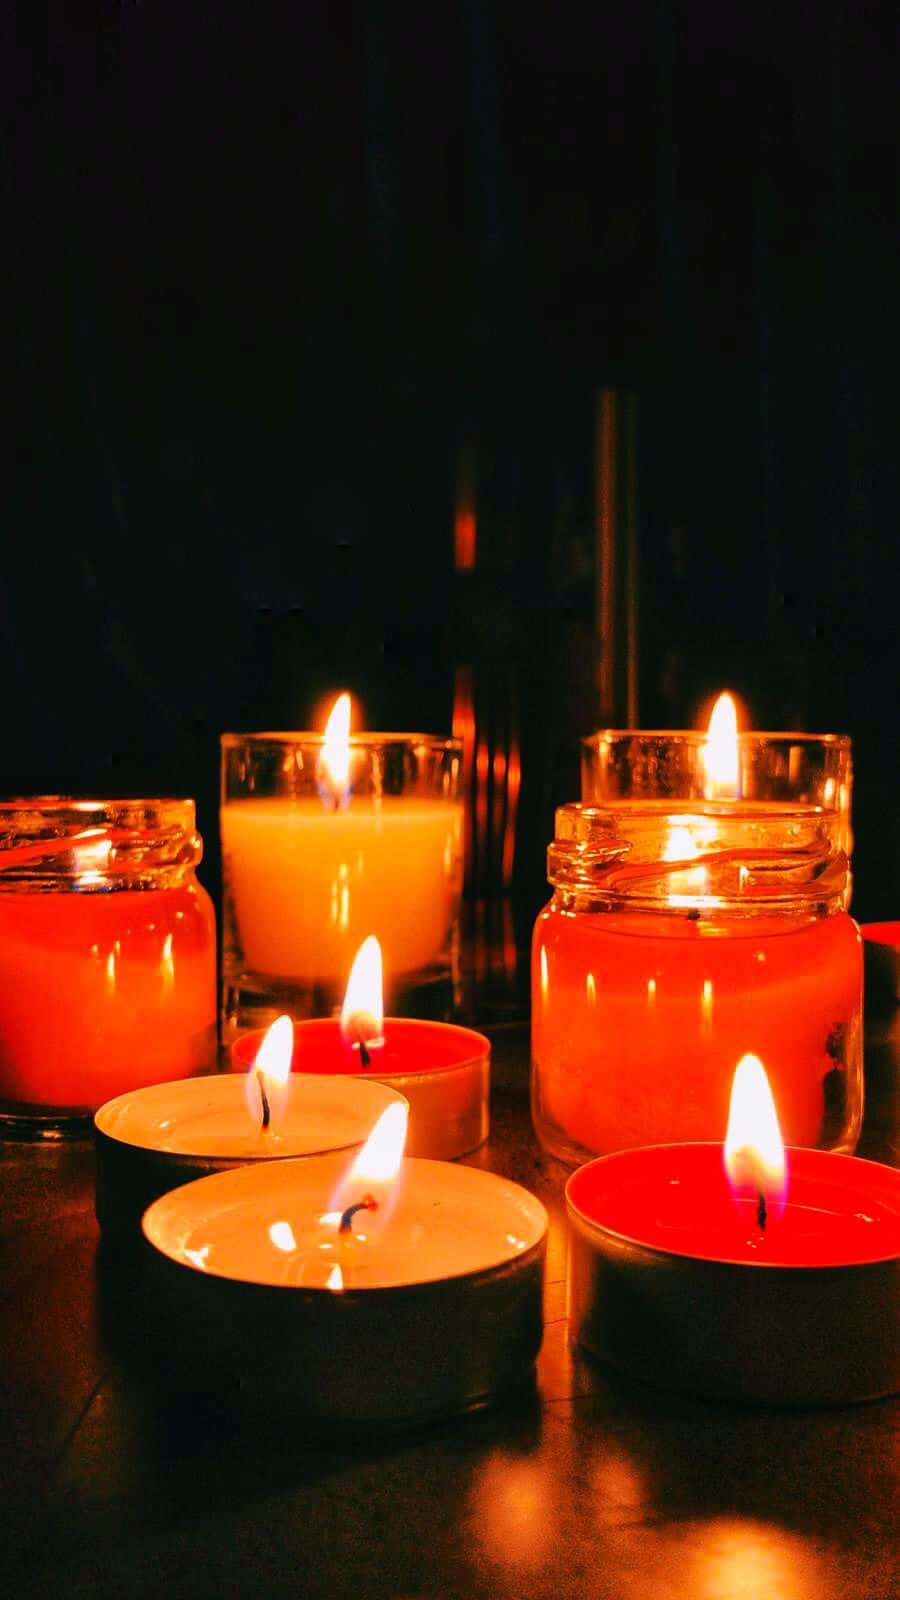 A Group Of Candles On A Table